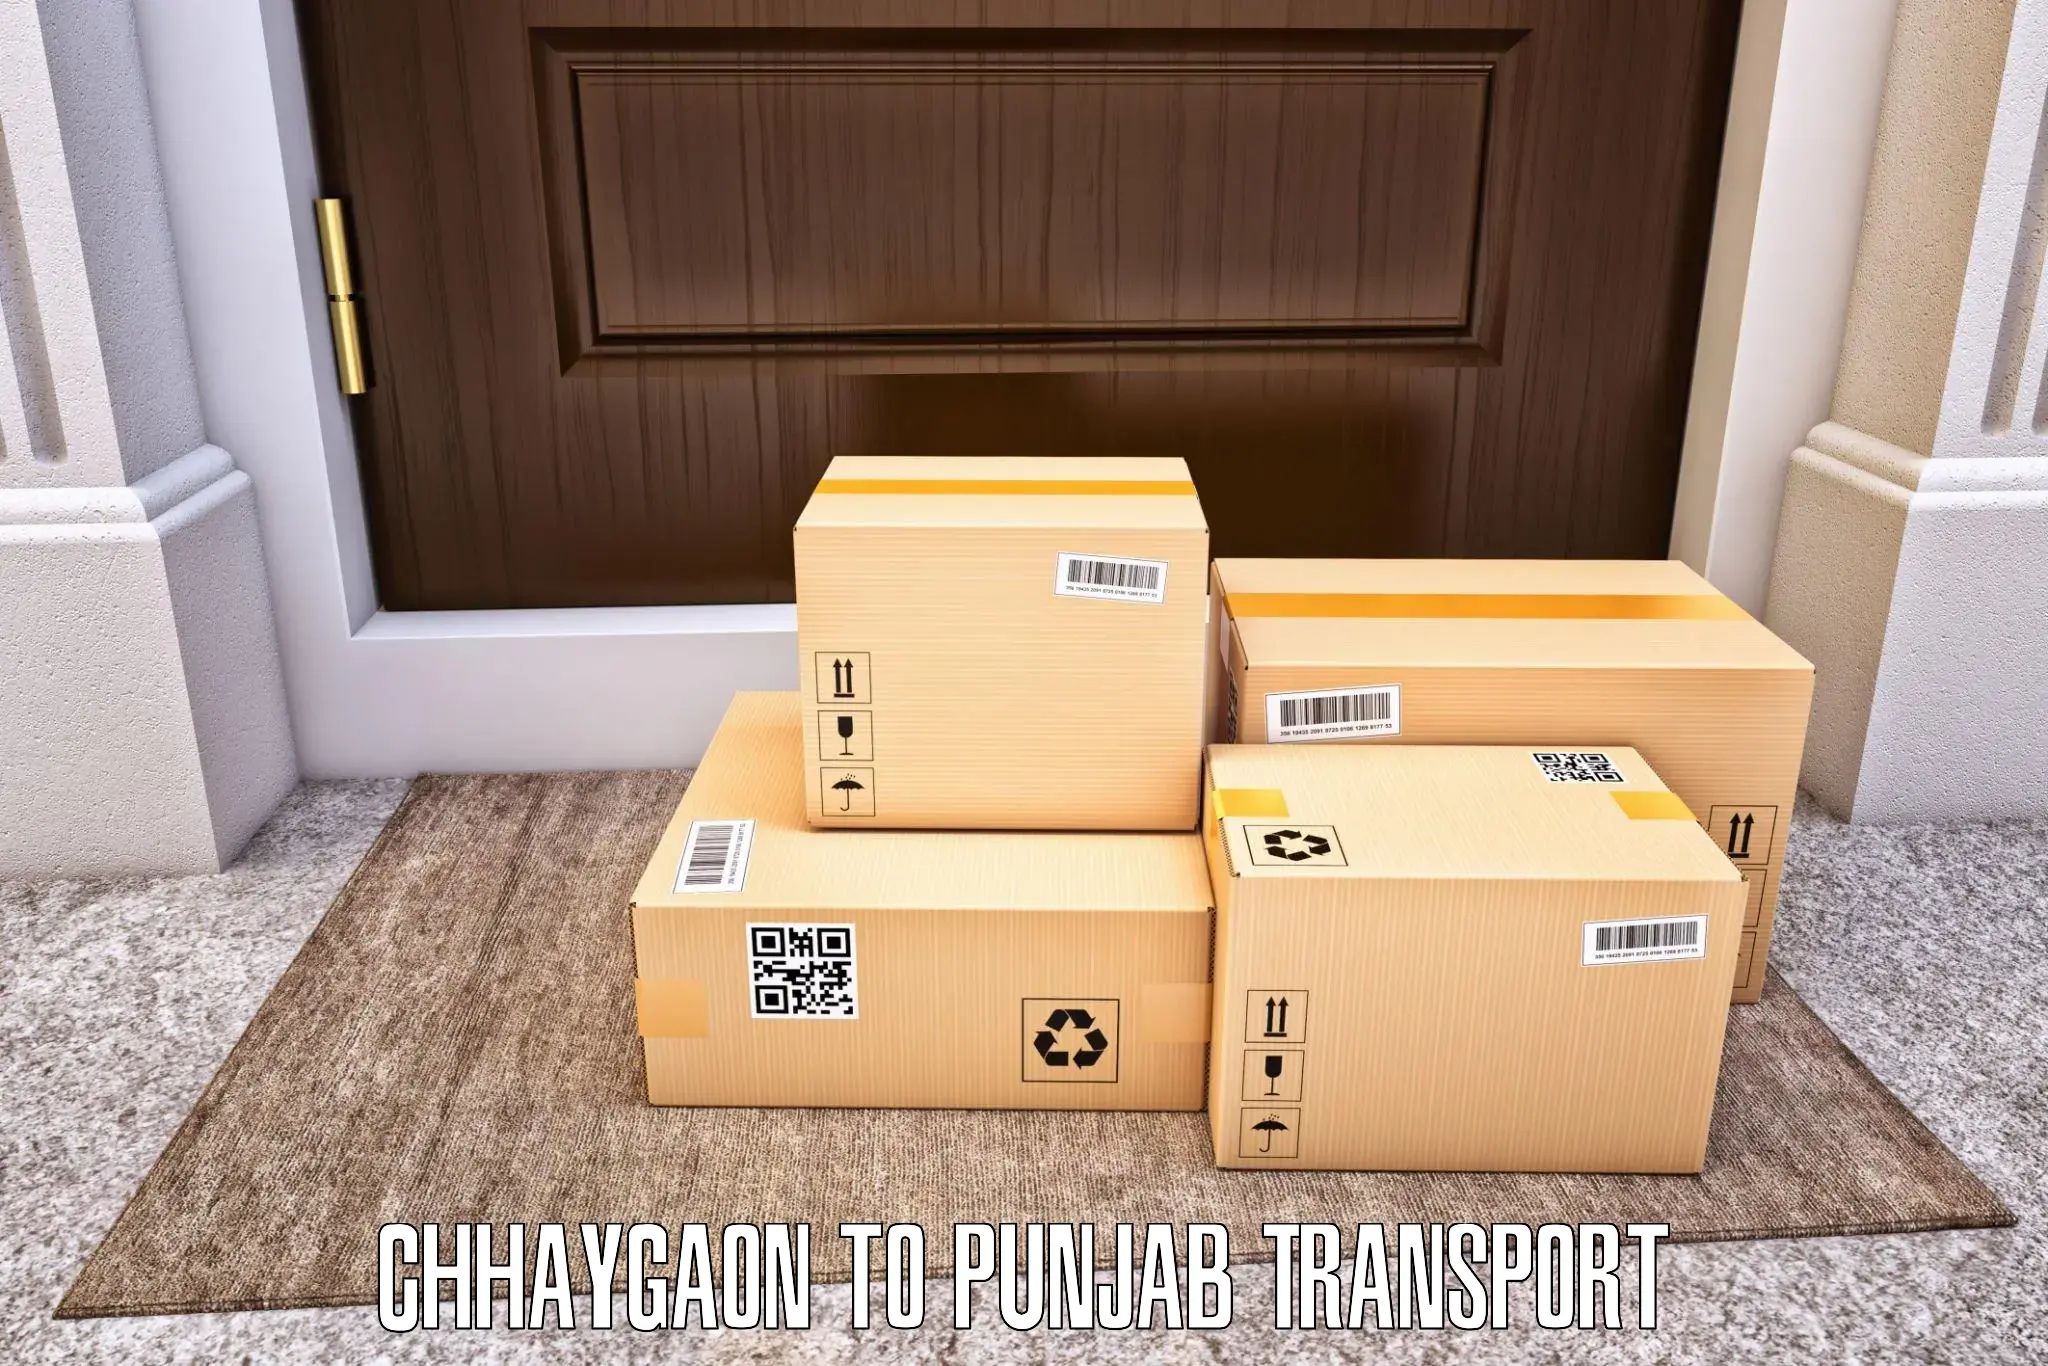 Transport bike from one state to another Chhaygaon to Bathinda